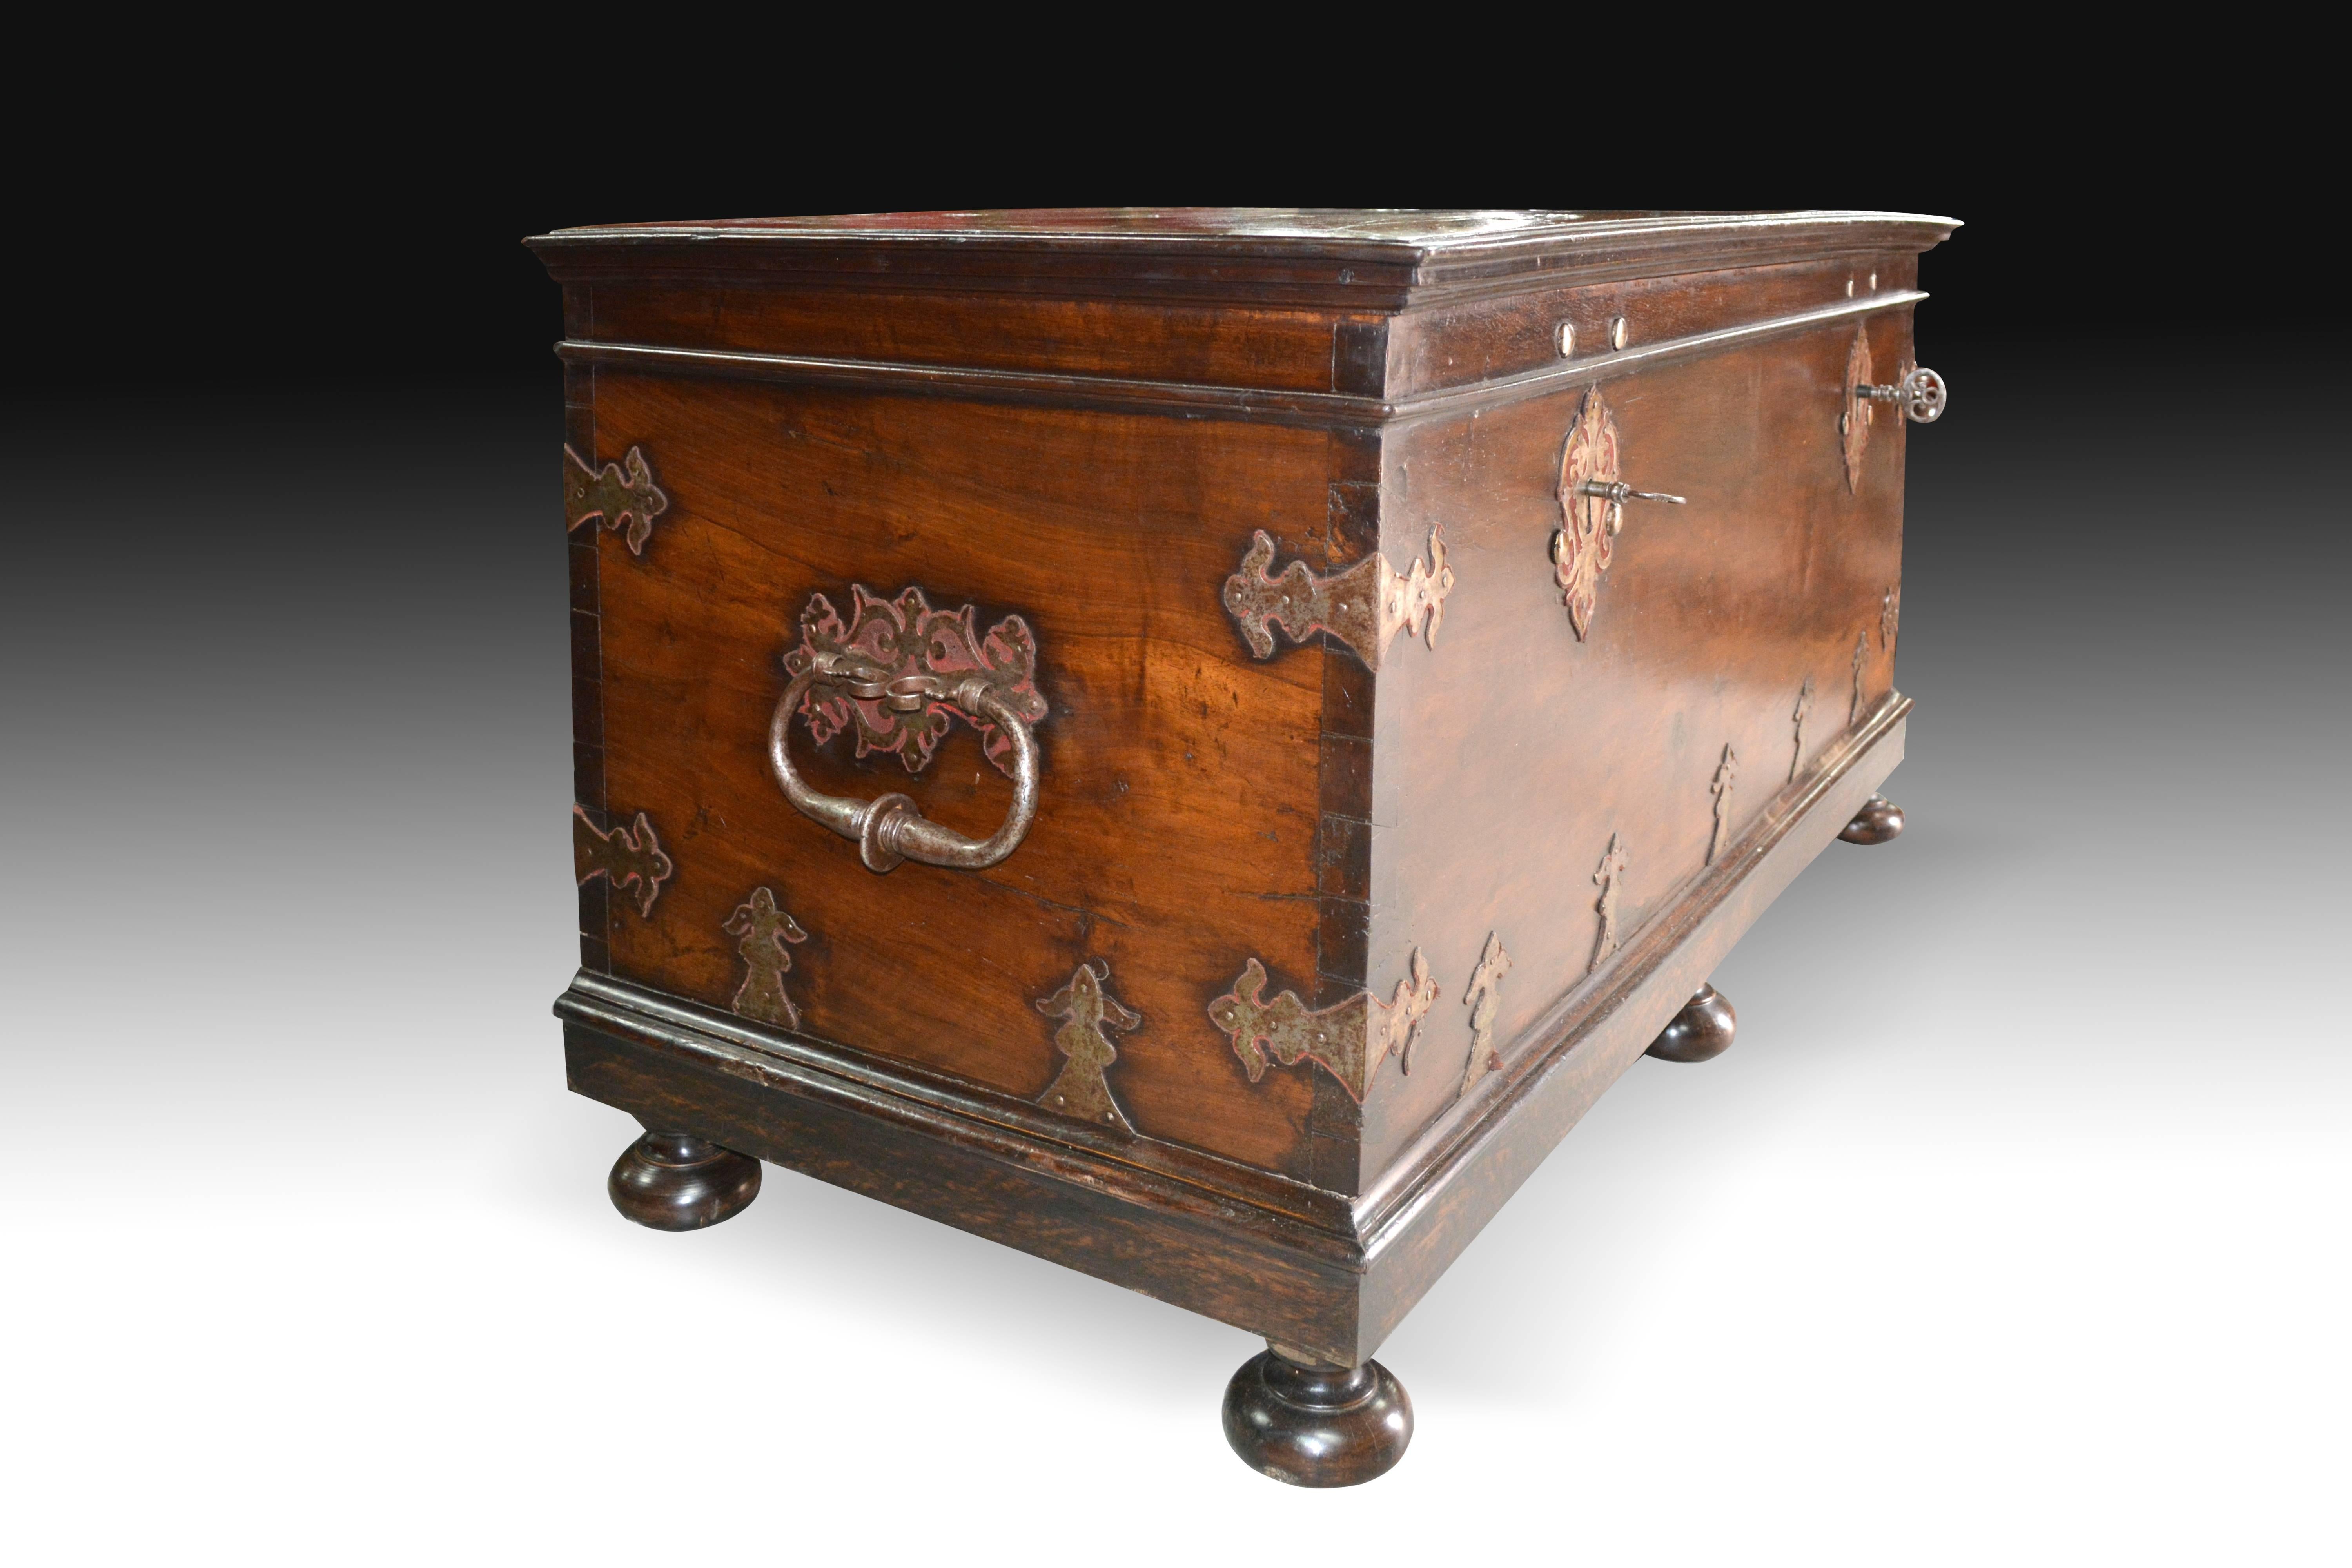 Rectangular chest with flat top raised on six legs with disc shape finished by moldings. The fronts of the furniture have a smooth area down, a thin molding that is repeated on the top and a finish, also molded, on the lid. Also, it is possible to